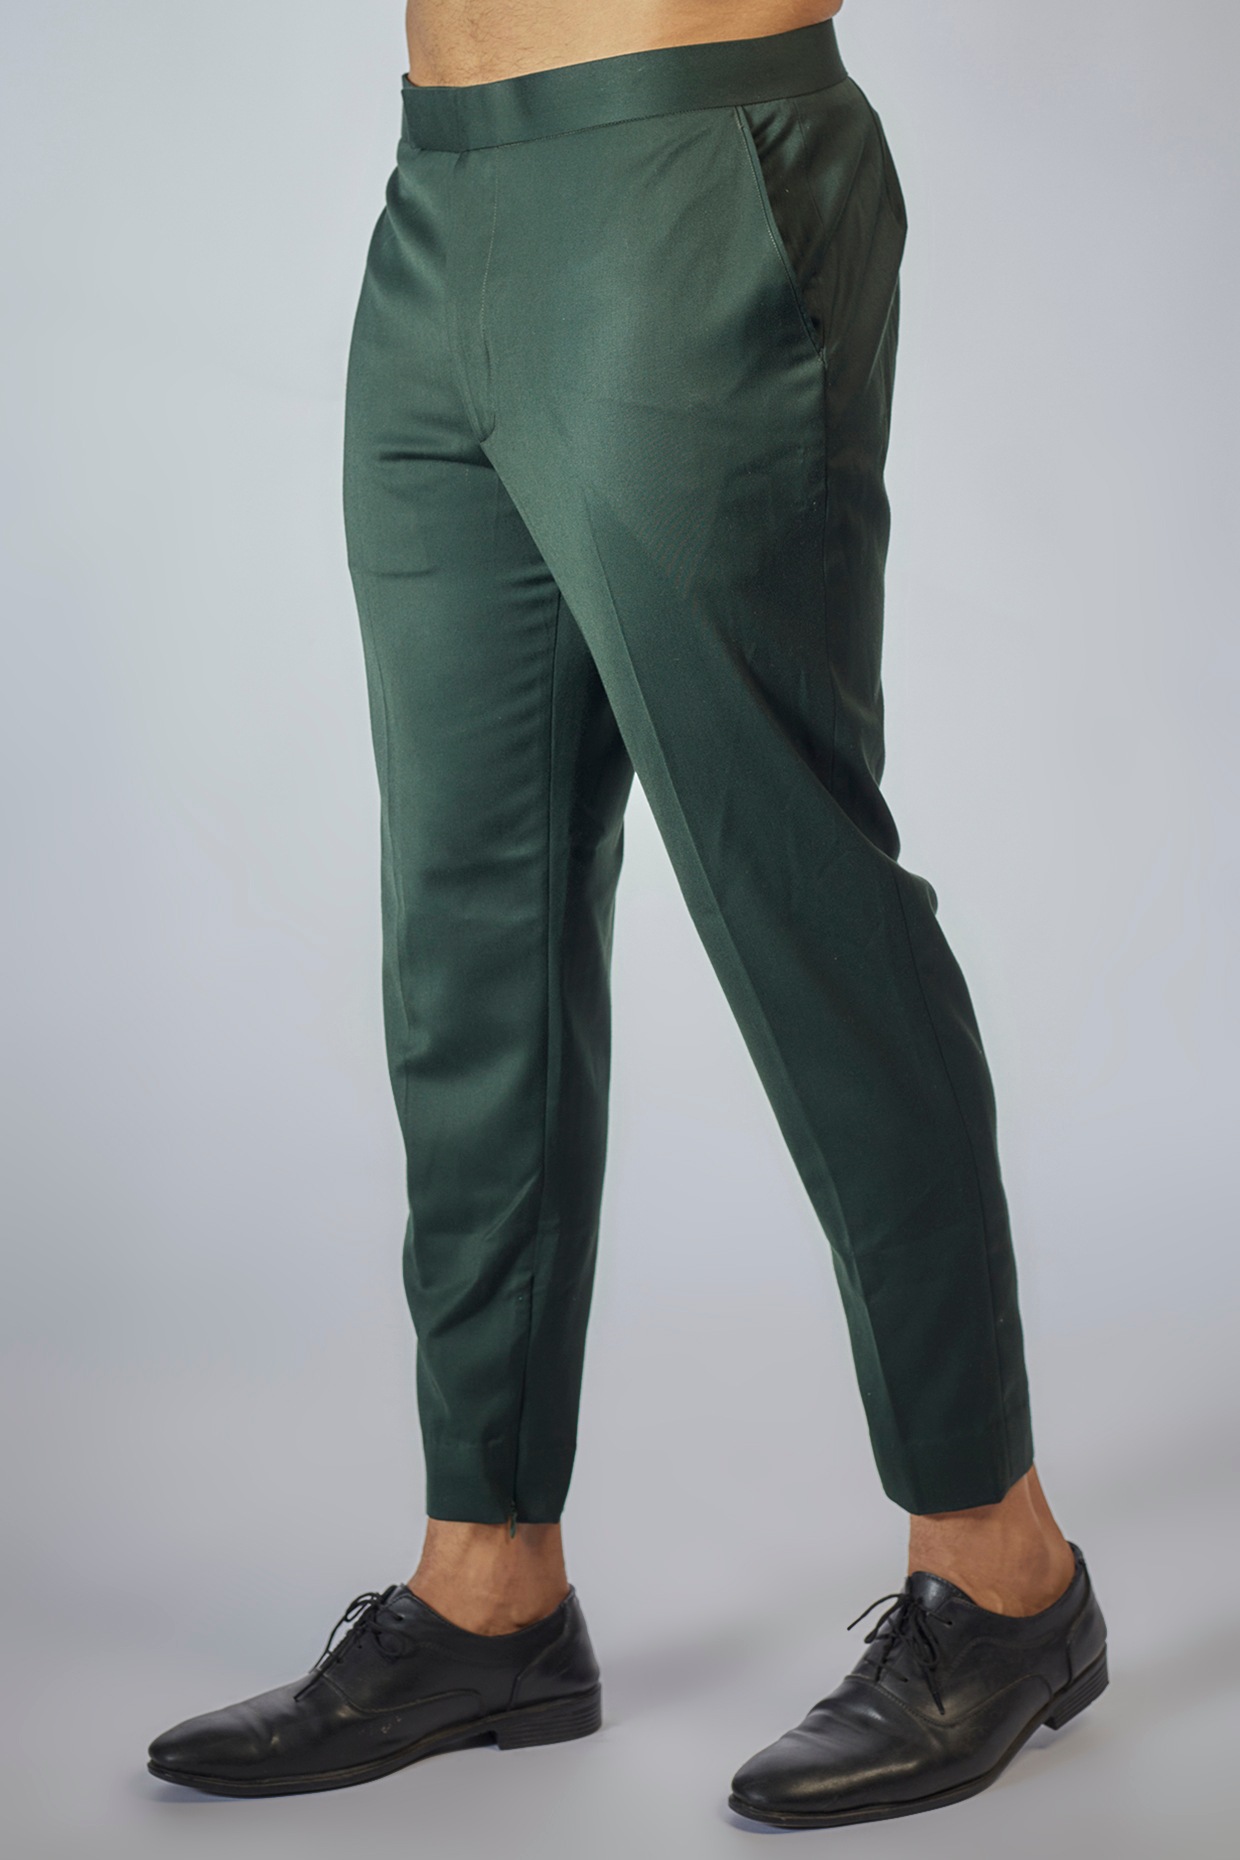 Relaxed Fit Corduroy trousers - Dark green - Men | H&M